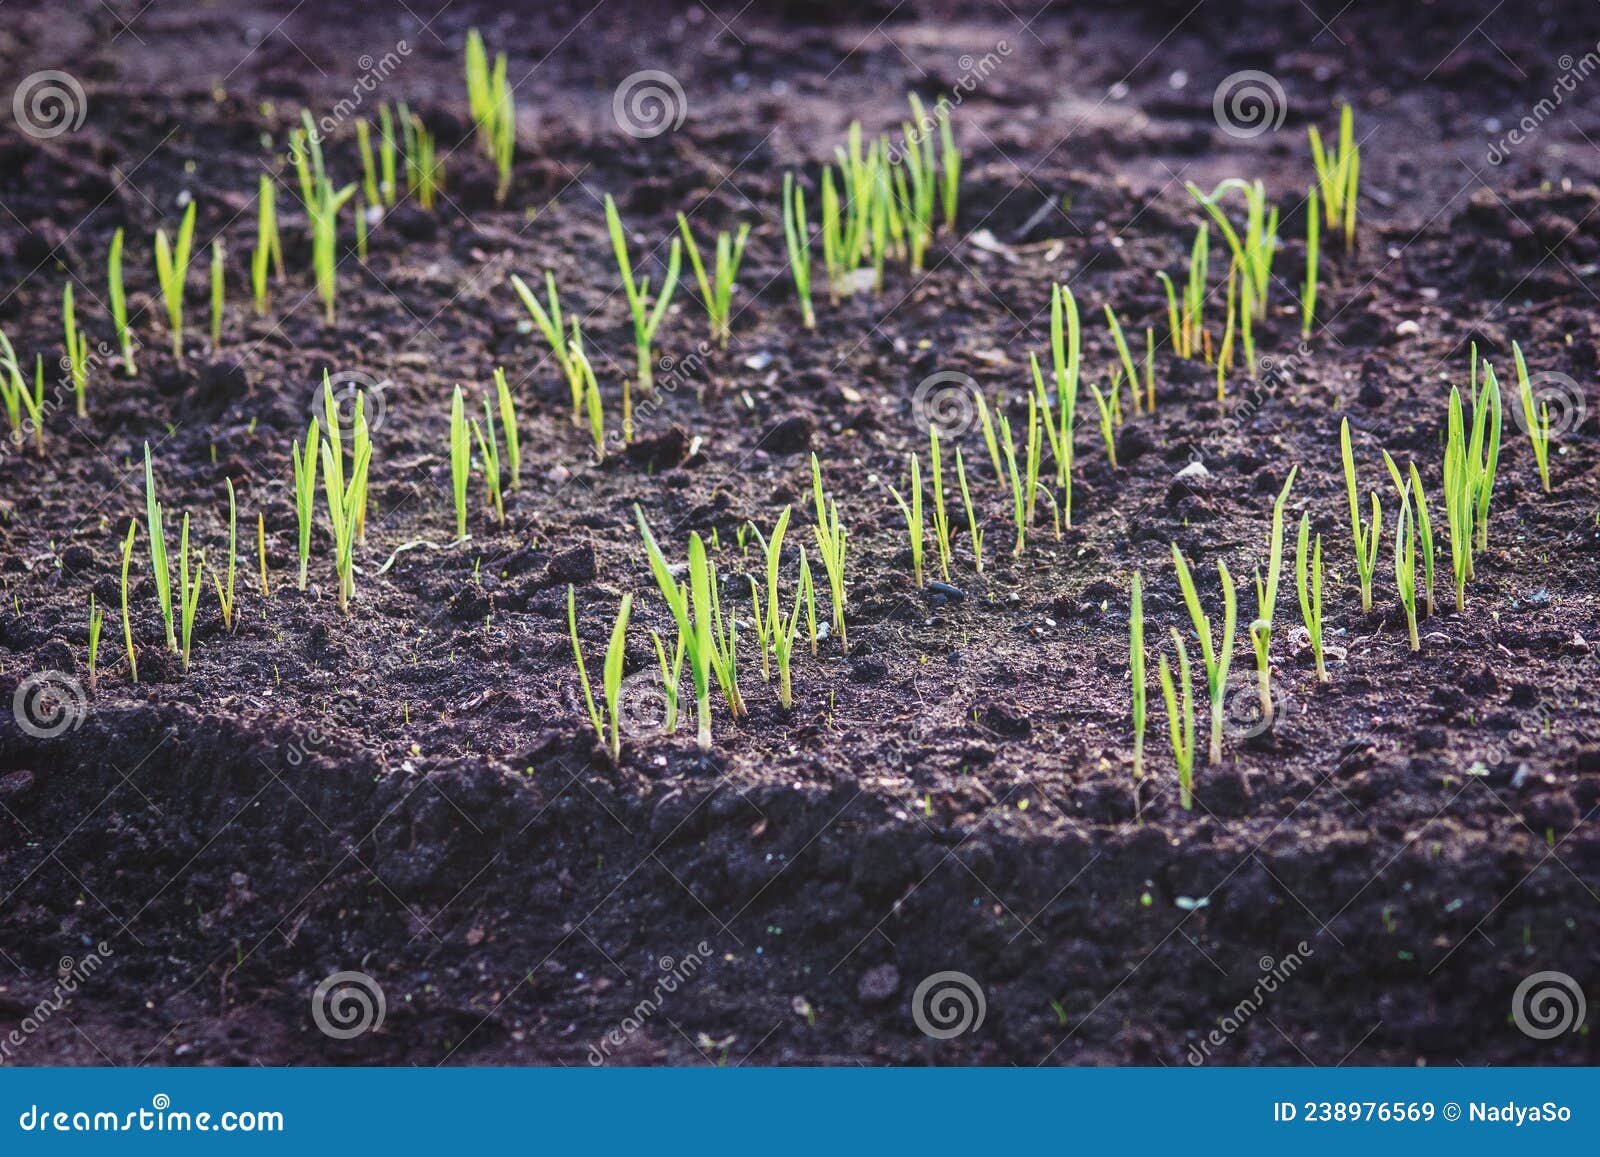 garlic sprouts growing in rows on mounded ground garden bed